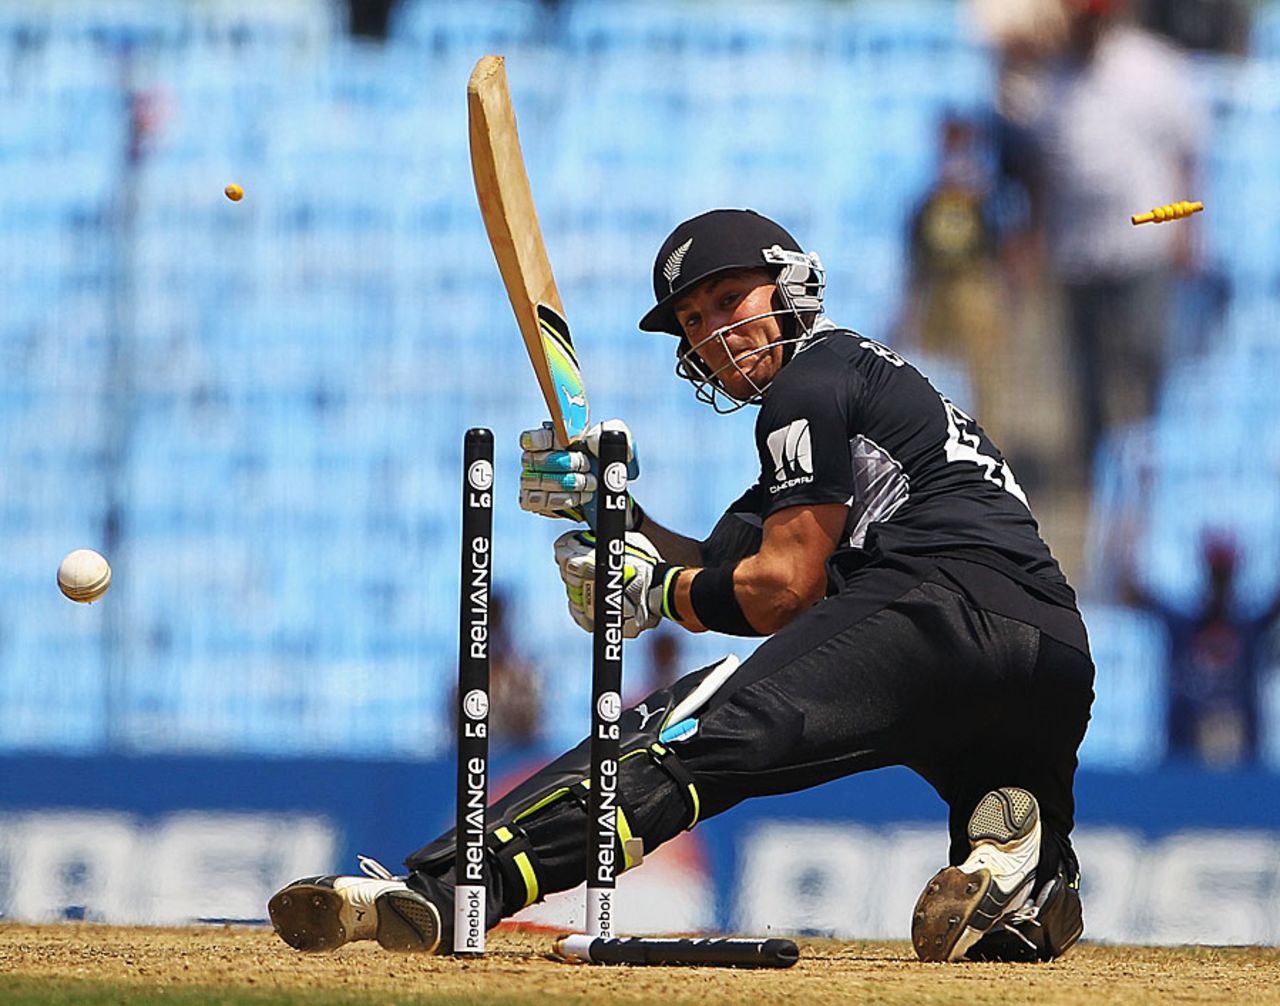 Brendon McCullum is bowled off a freehit, Kenya v New Zealand, Group A, World Cup 2011, Chennai, February 20, 2011